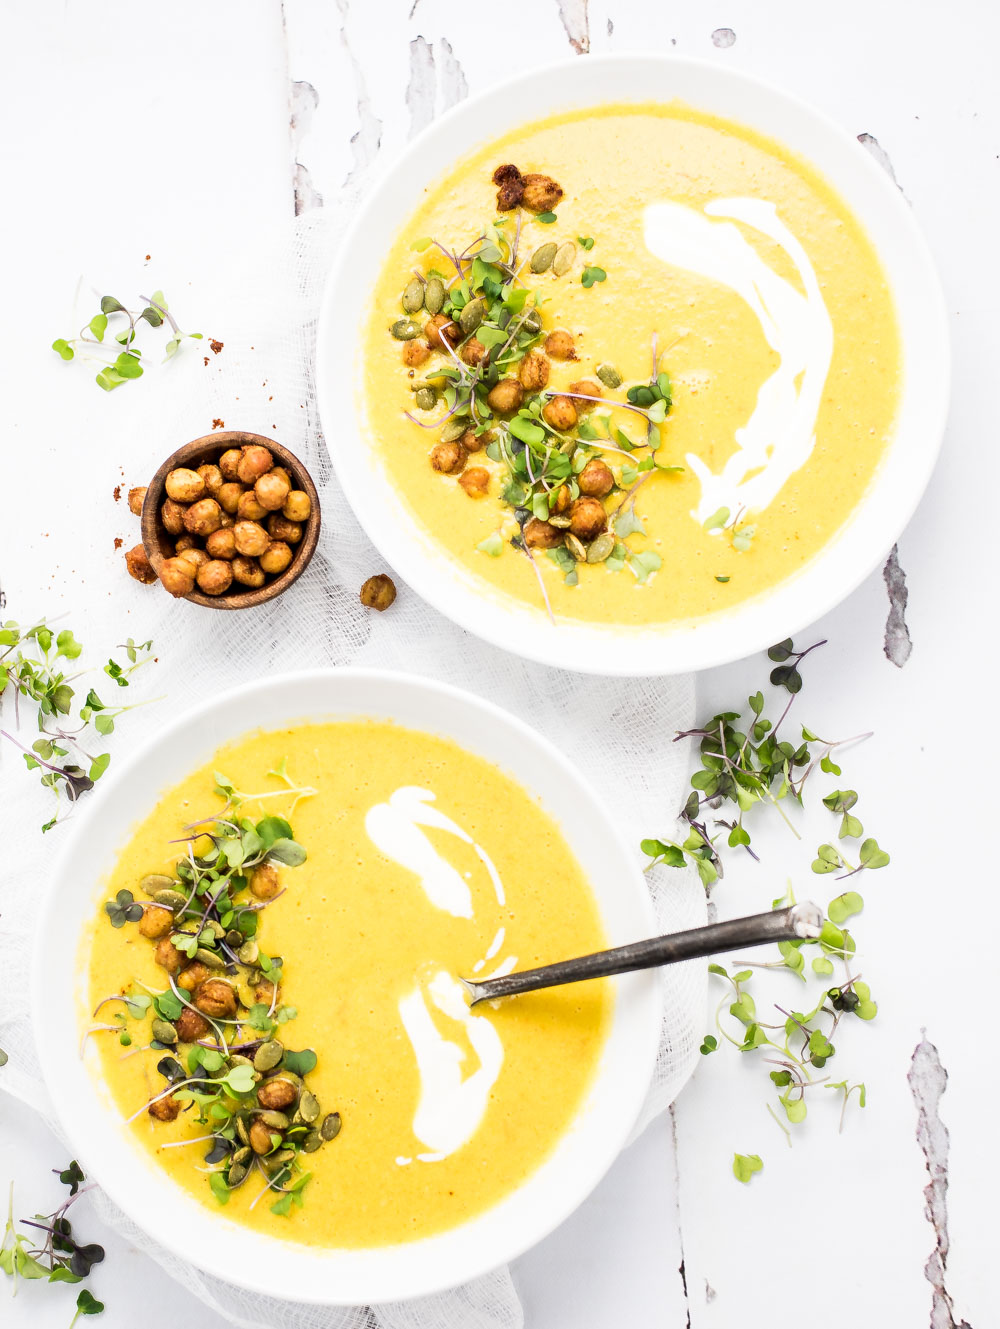 Soup isn't just for the winter! This Summer Corn and Carrot Soup with Roasted Chickpeas can be served warm or chilled and is perfect for summer!